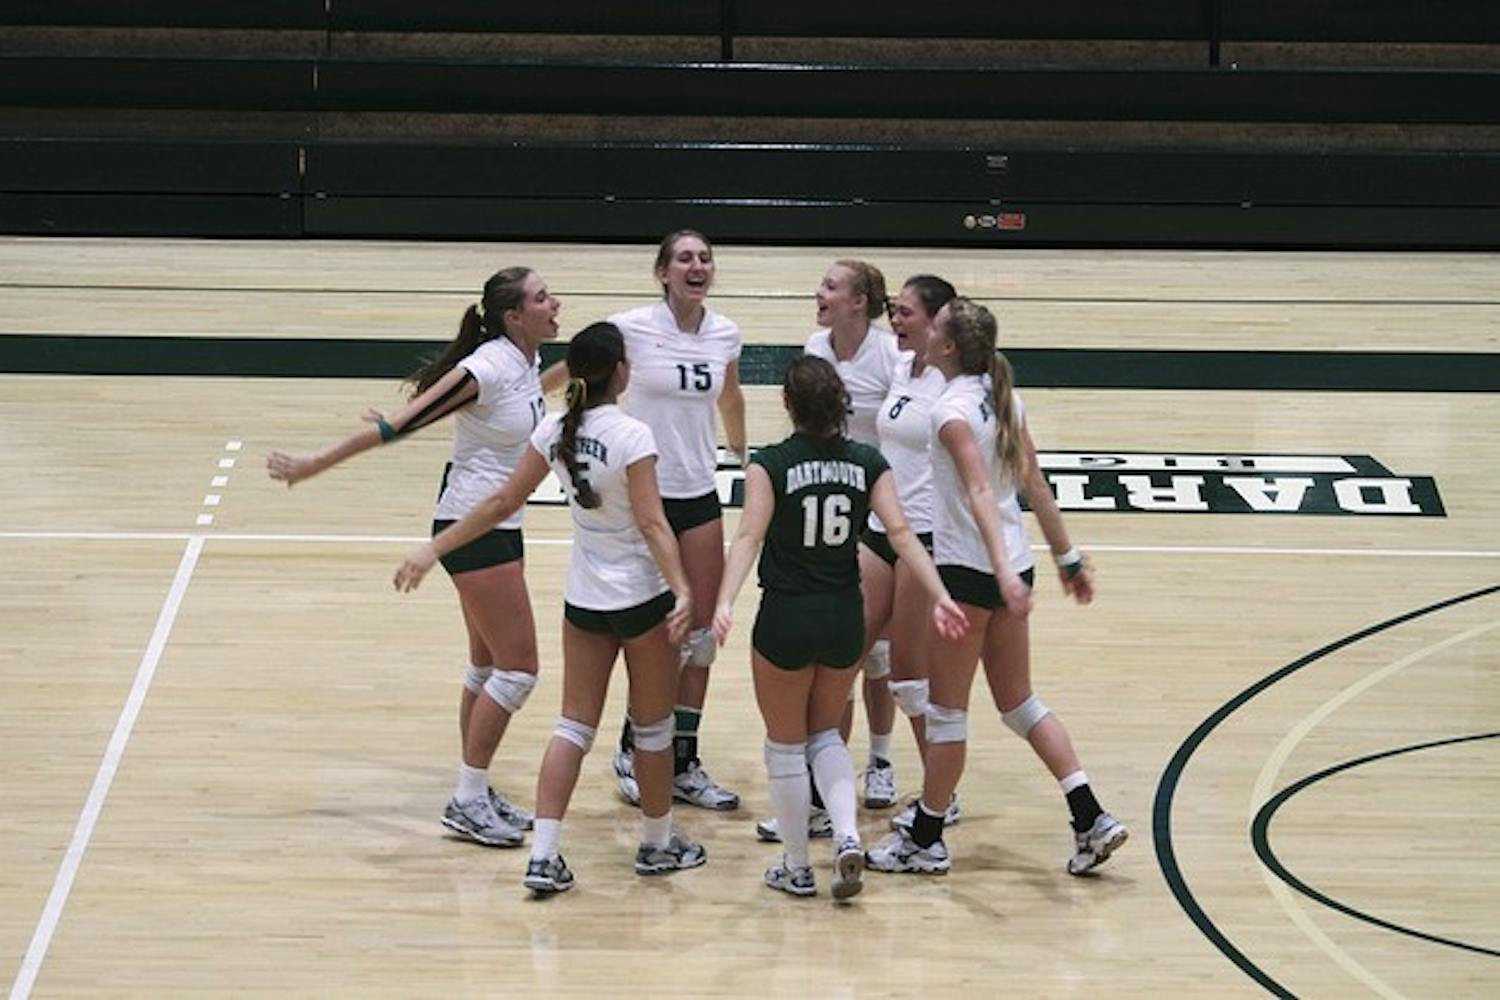 The Big Green volleyball team failed to convert several set points in the first game, leading to a straight-set loss to the University of New Hampshire.